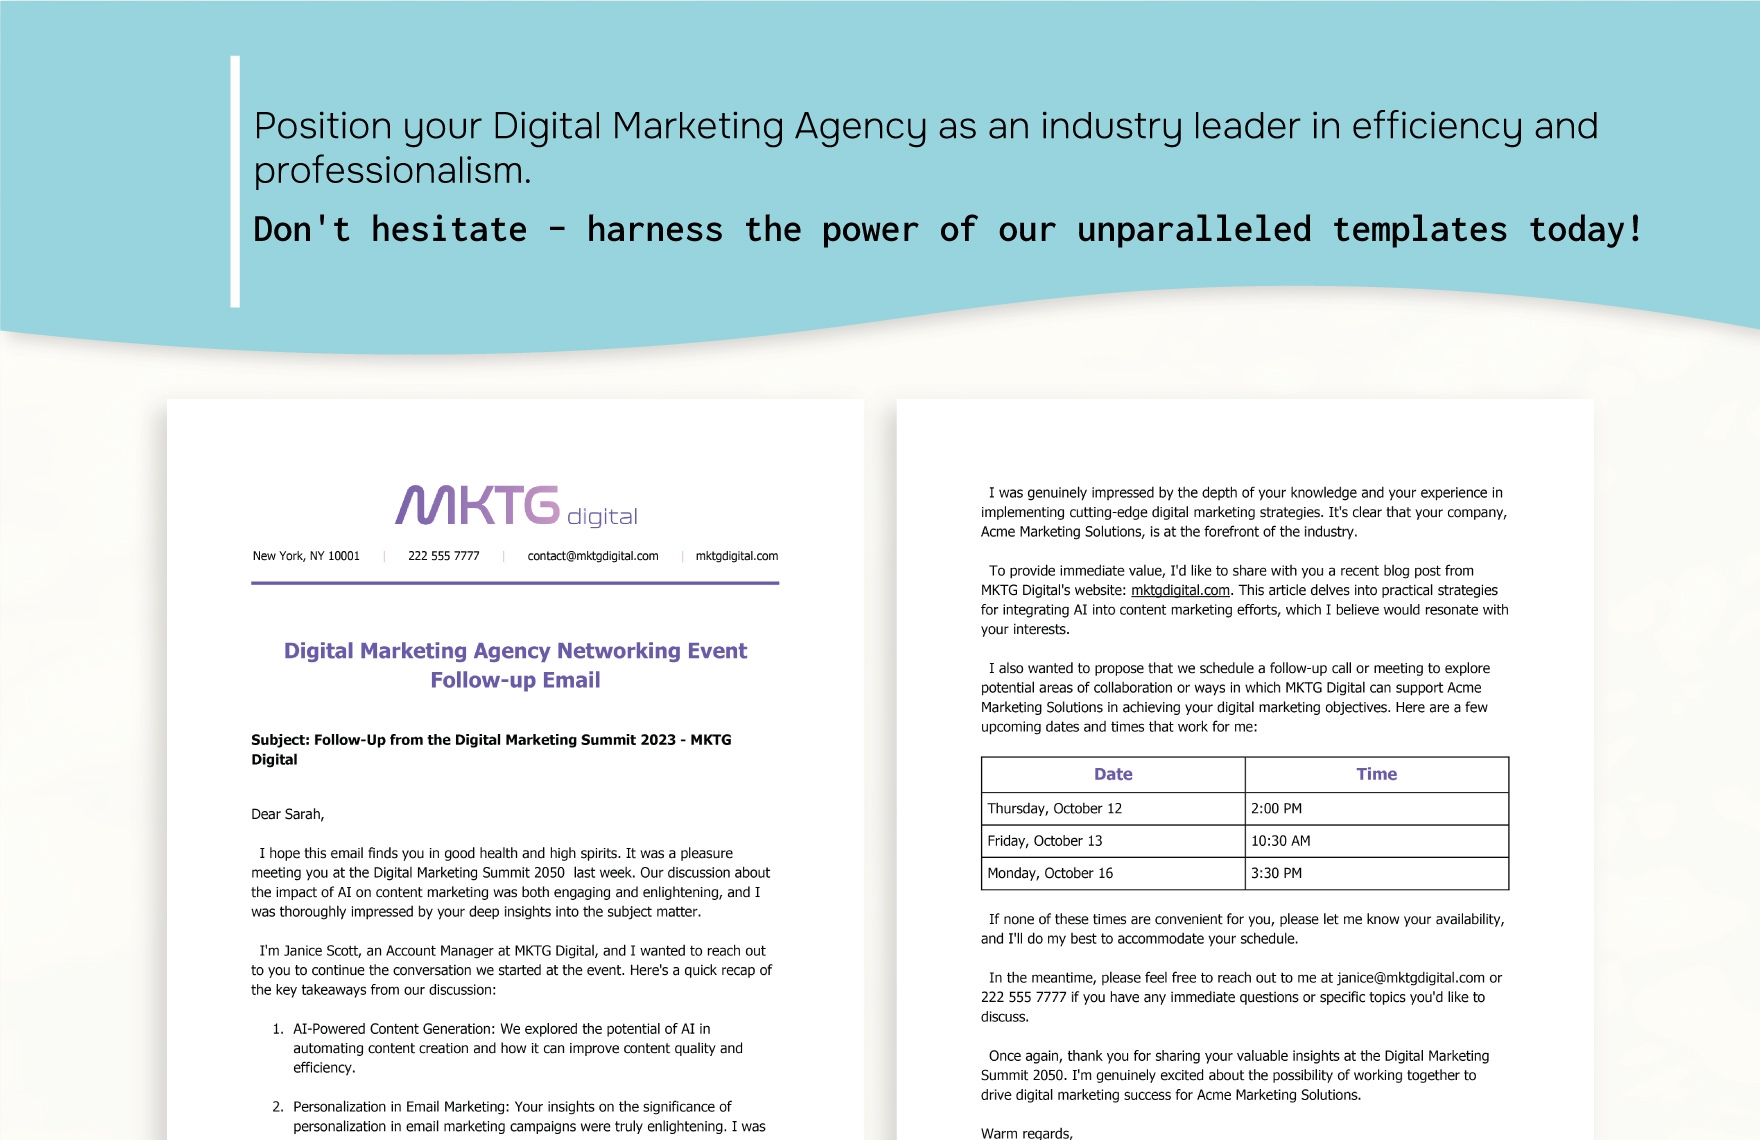 Digital Marketing Agency Networking Event Follow-up Email Template